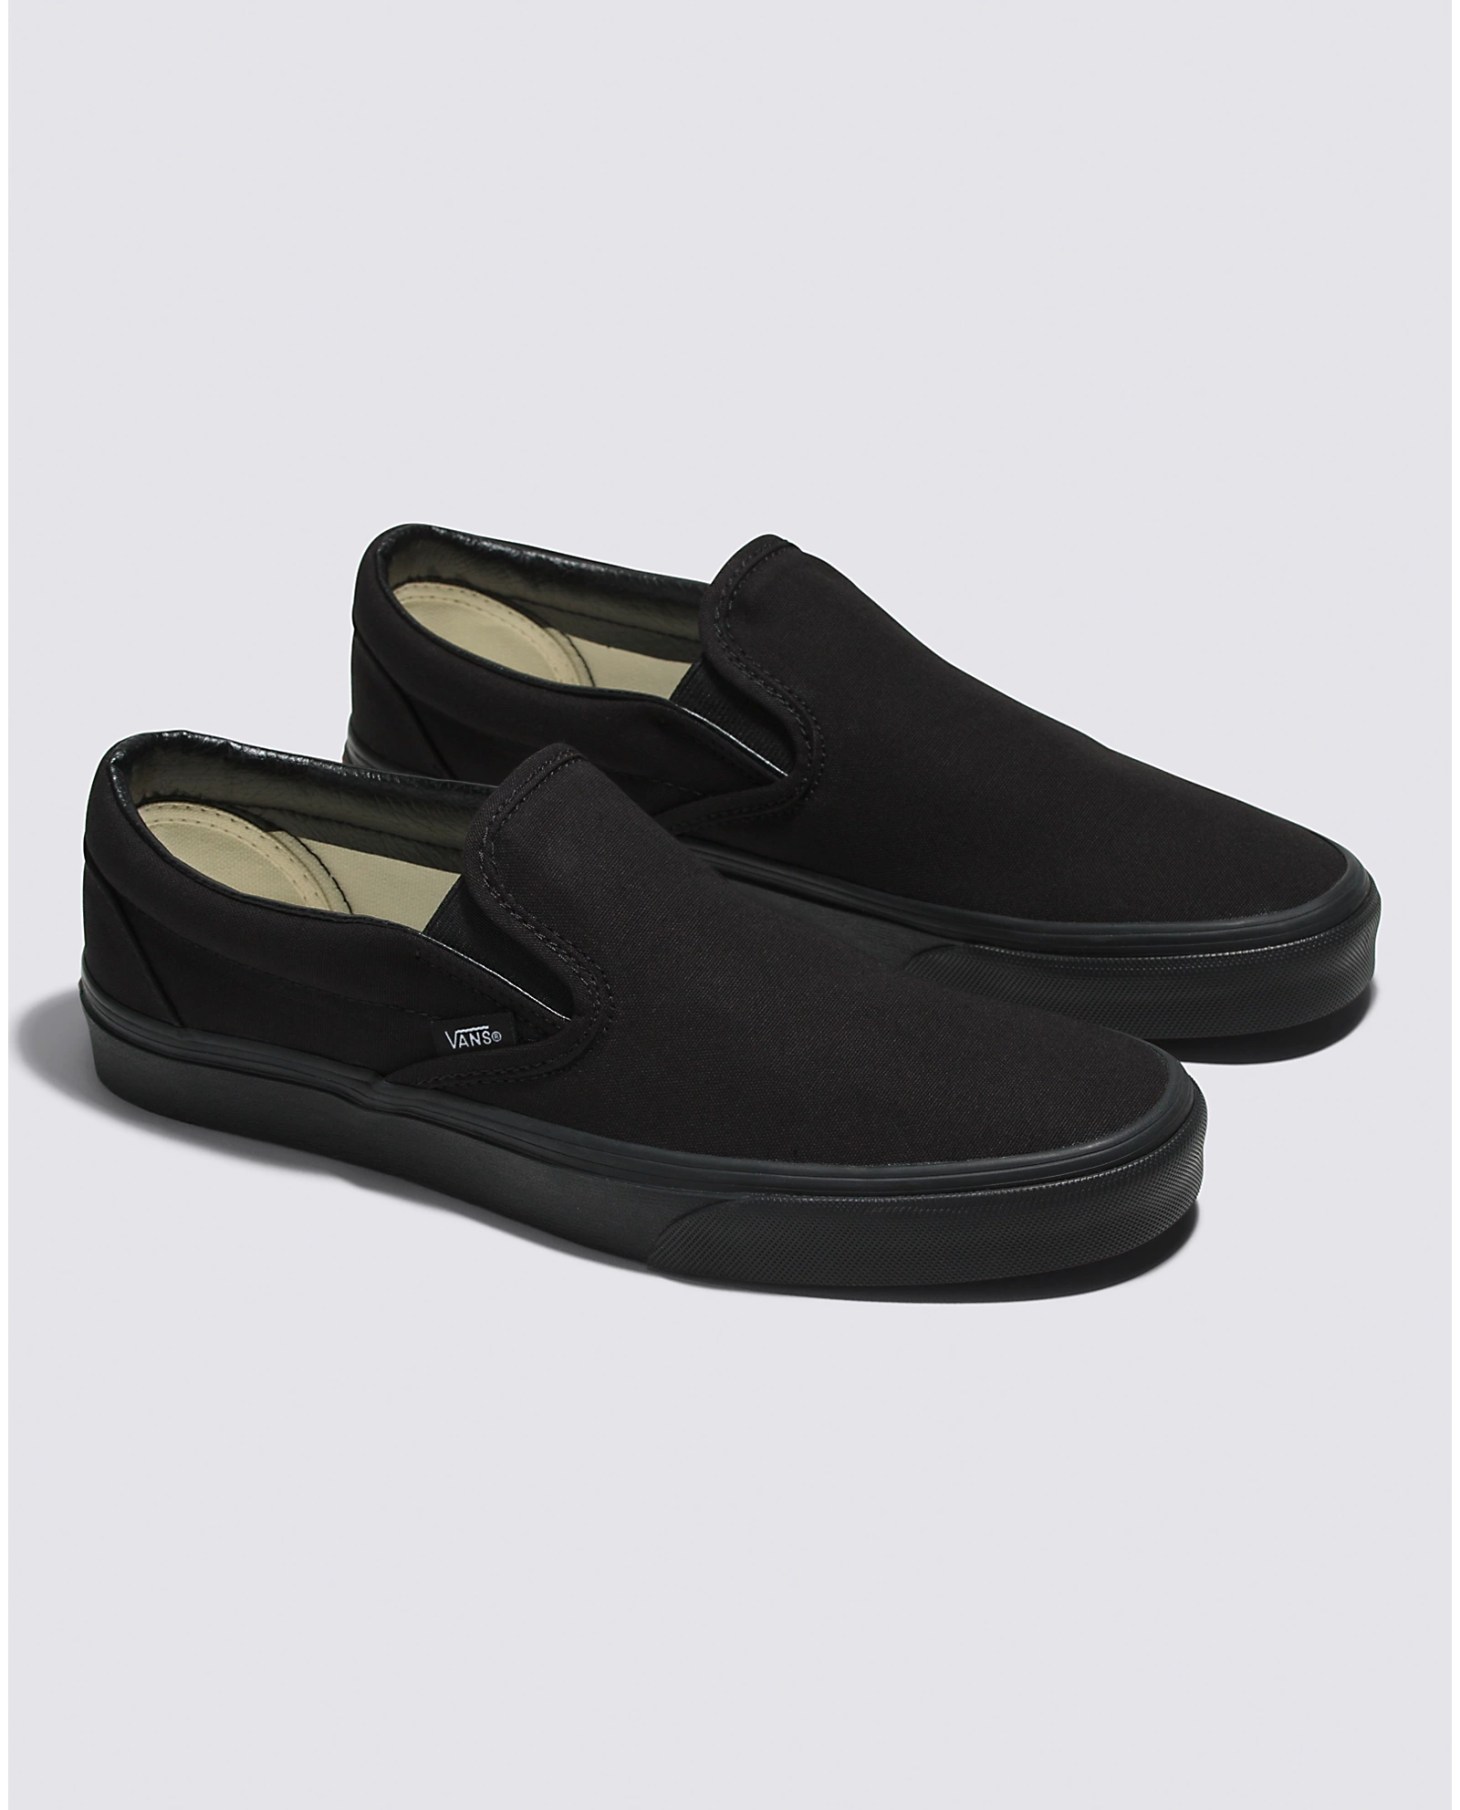 vans classic slip ons, one of the best black sneakers for women